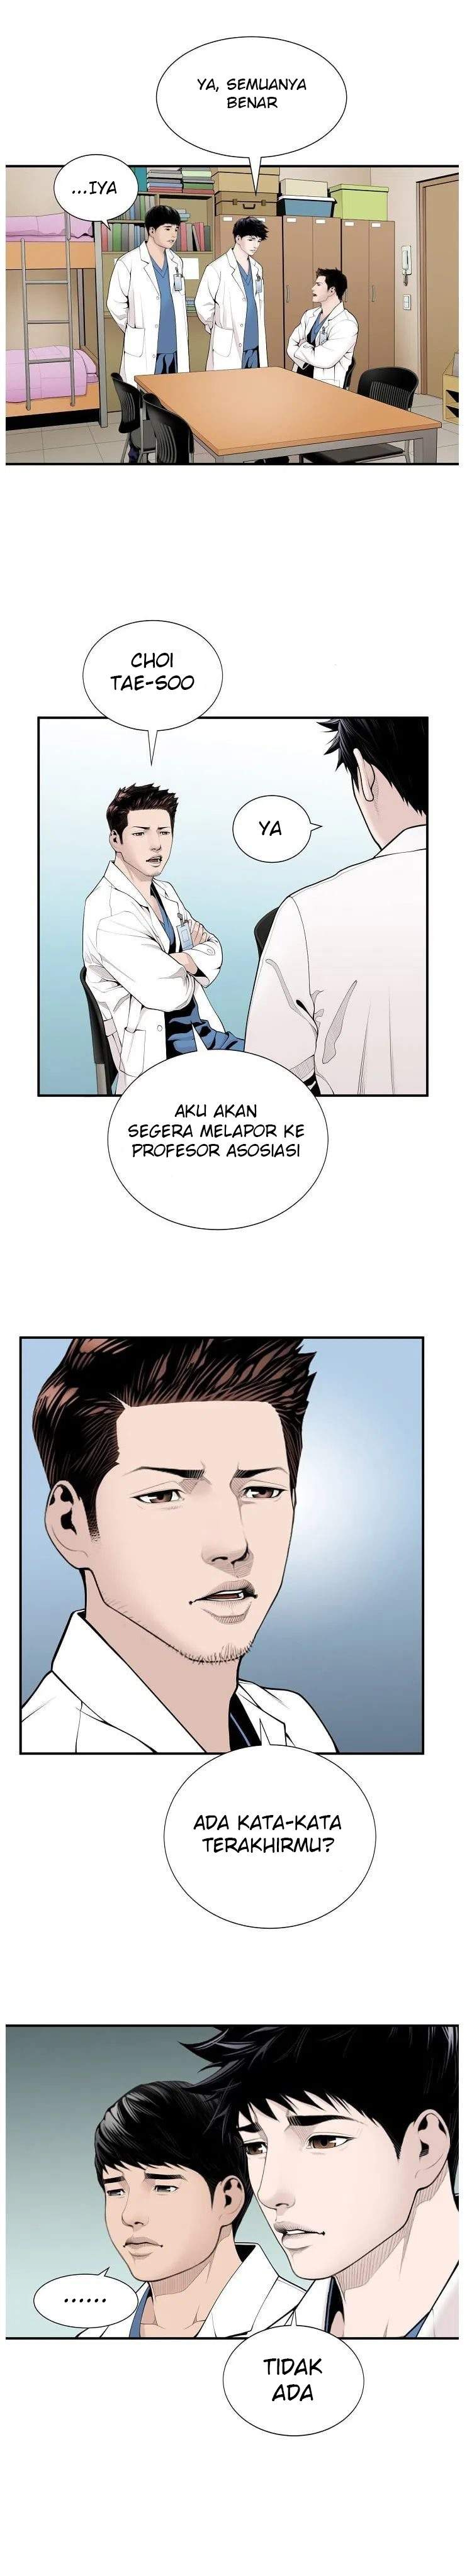 Dr. Choi Tae-soo Chapter 12